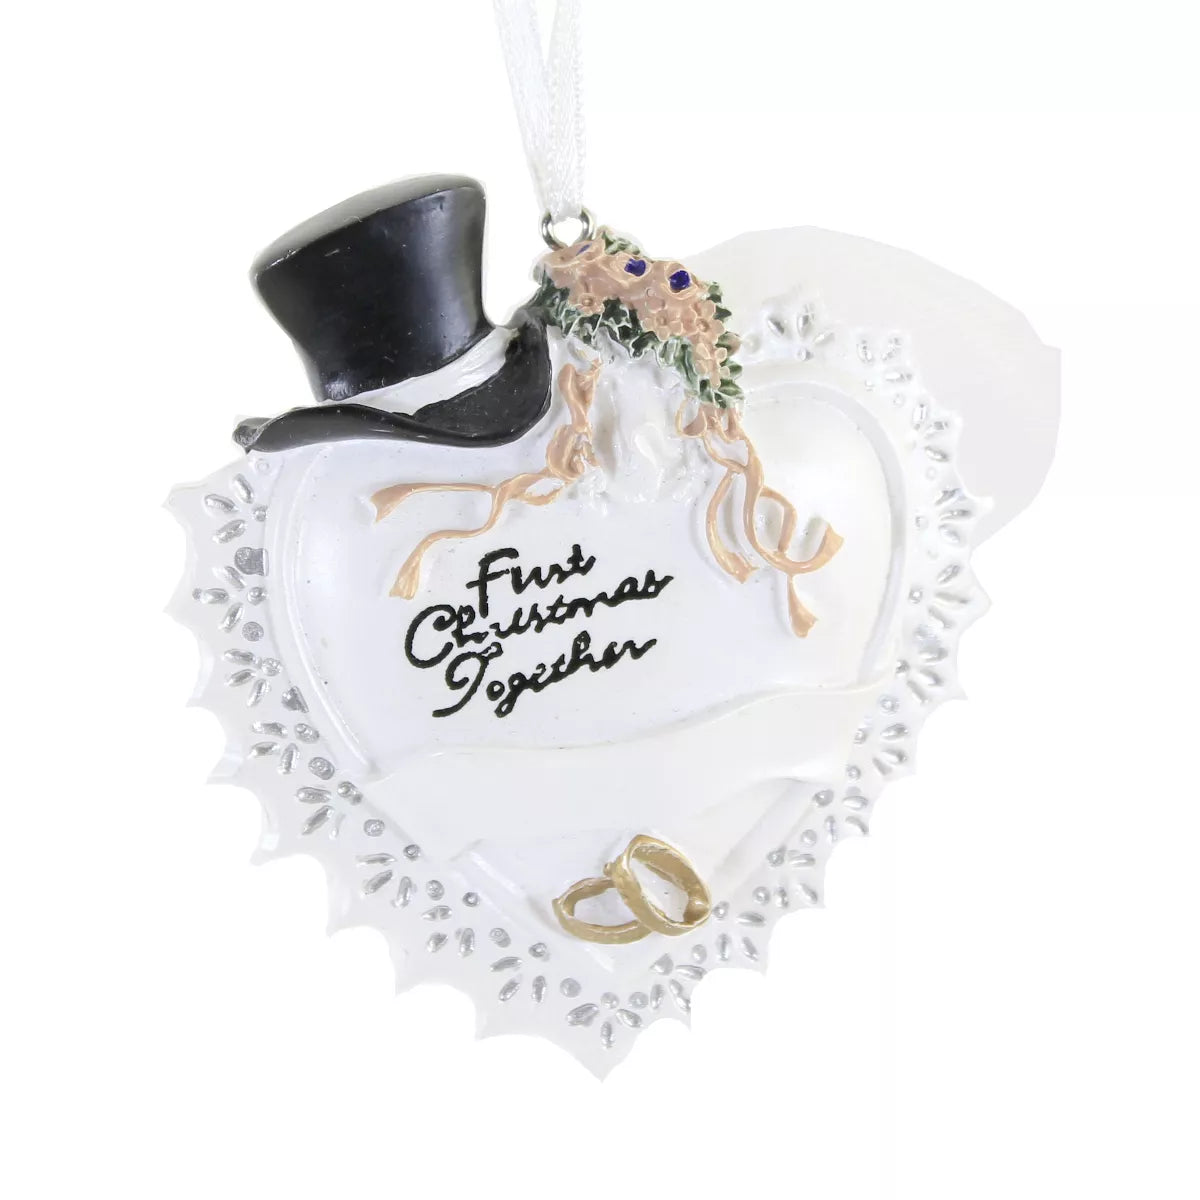 "First Christmas Together" Top Hat & Veil Ornament